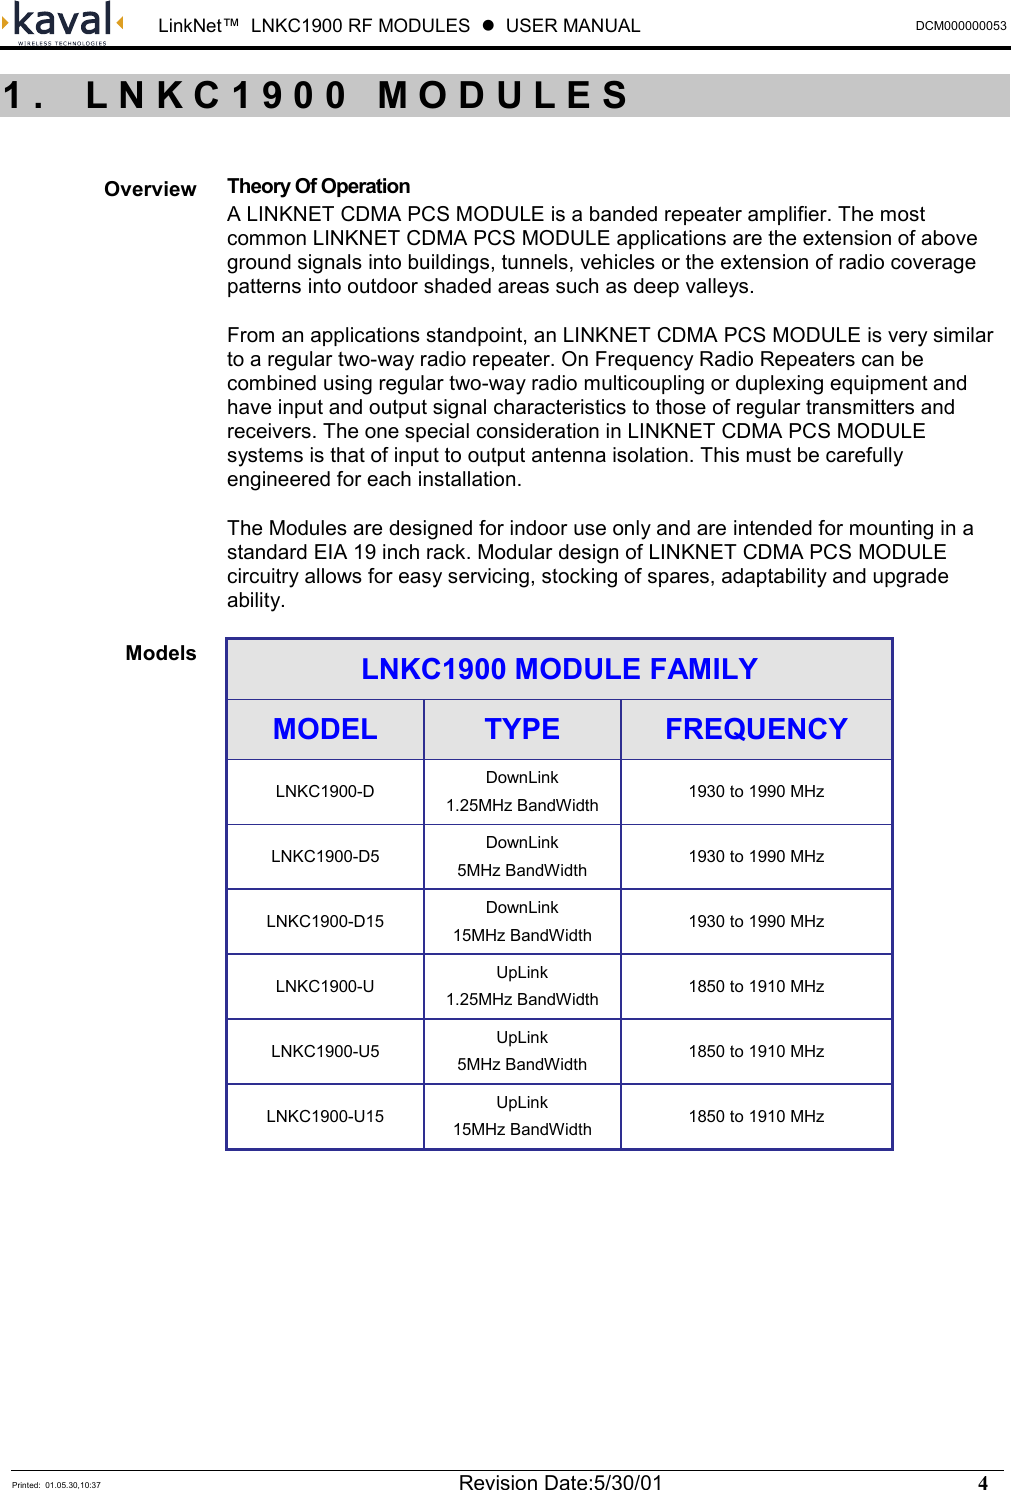  LinkNet™  LNKC1900 RF MODULES  !  USER MANUAL DCM000000053   Printed:  01.05.30,10:37  Revision Date:5/30/01    4    Theory Of Operation A LINKNET CDMA PCS MODULE is a banded repeater amplifier. The most common LINKNET CDMA PCS MODULE applications are the extension of above ground signals into buildings, tunnels, vehicles or the extension of radio coverage patterns into outdoor shaded areas such as deep valleys. From an applications standpoint, an LINKNET CDMA PCS MODULE is very similar to a regular two-way radio repeater. On Frequency Radio Repeaters can be combined using regular two-way radio multicoupling or duplexing equipment and have input and output signal characteristics to those of regular transmitters and receivers. The one special consideration in LINKNET CDMA PCS MODULE systems is that of input to output antenna isolation. This must be carefully engineered for each installation. The Modules are designed for indoor use only and are intended for mounting in a standard EIA 19 inch rack. Modular design of LINKNET CDMA PCS MODULE circuitry allows for easy servicing, stocking of spares, adaptability and upgrade ability. LNKC1900 MODULE FAMILY MODEL  TYPE  FREQUENCY LNKC1900-D  DownLink 1.25MHz BandWidth  1930 to 1990 MHz LNKC1900-D5  DownLink 5MHz BandWidth  1930 to 1990 MHz LNKC1900-D15  DownLink 15MHz BandWidth  1930 to 1990 MHz LNKC1900-U  UpLink 1.25MHz BandWidth  1850 to 1910 MHz LNKC1900-U5  UpLink 5MHz BandWidth  1850 to 1910 MHz LNKC1900-U15  UpLink 15MHz BandWidth  1850 to 1910 MHz  1. LNKC1900 MODULESOverview Models 